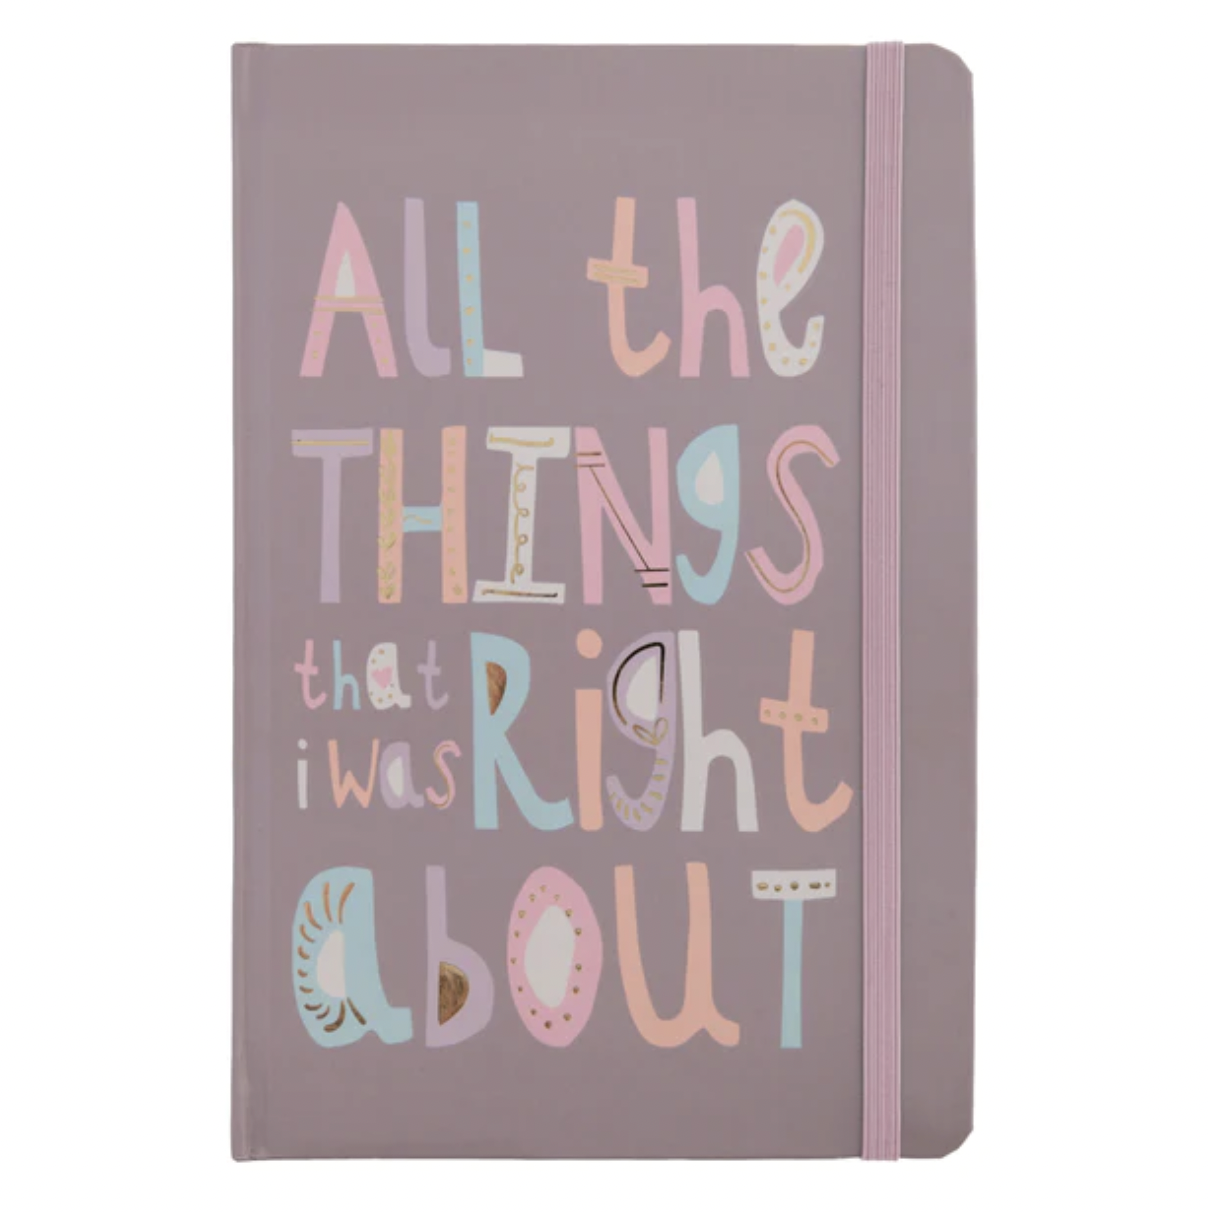 "All The Thing's That I Was Right About" Journal